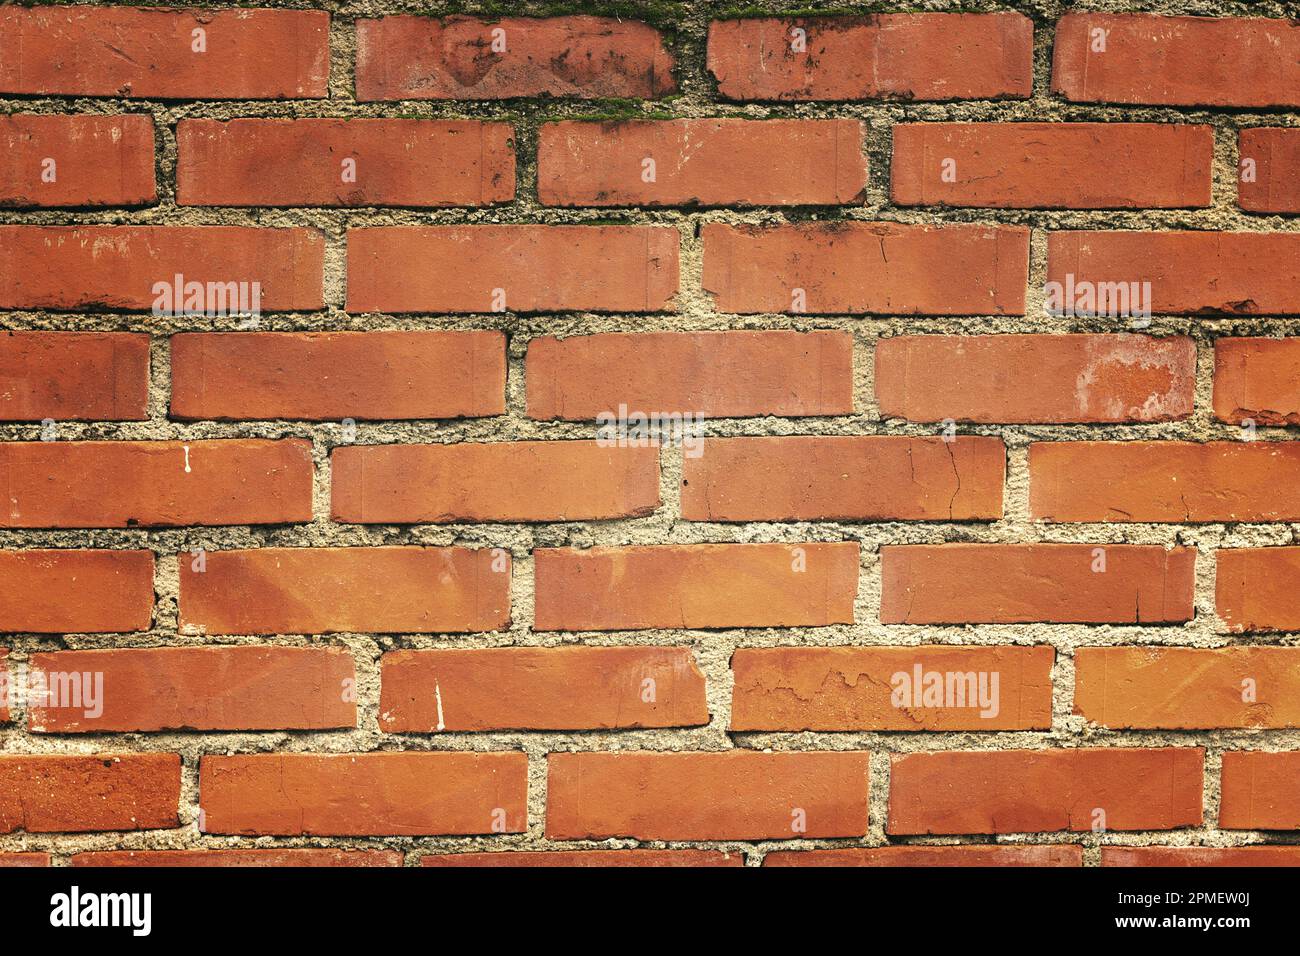 brick wall background with vignette ready for your architecture design Stock Photo